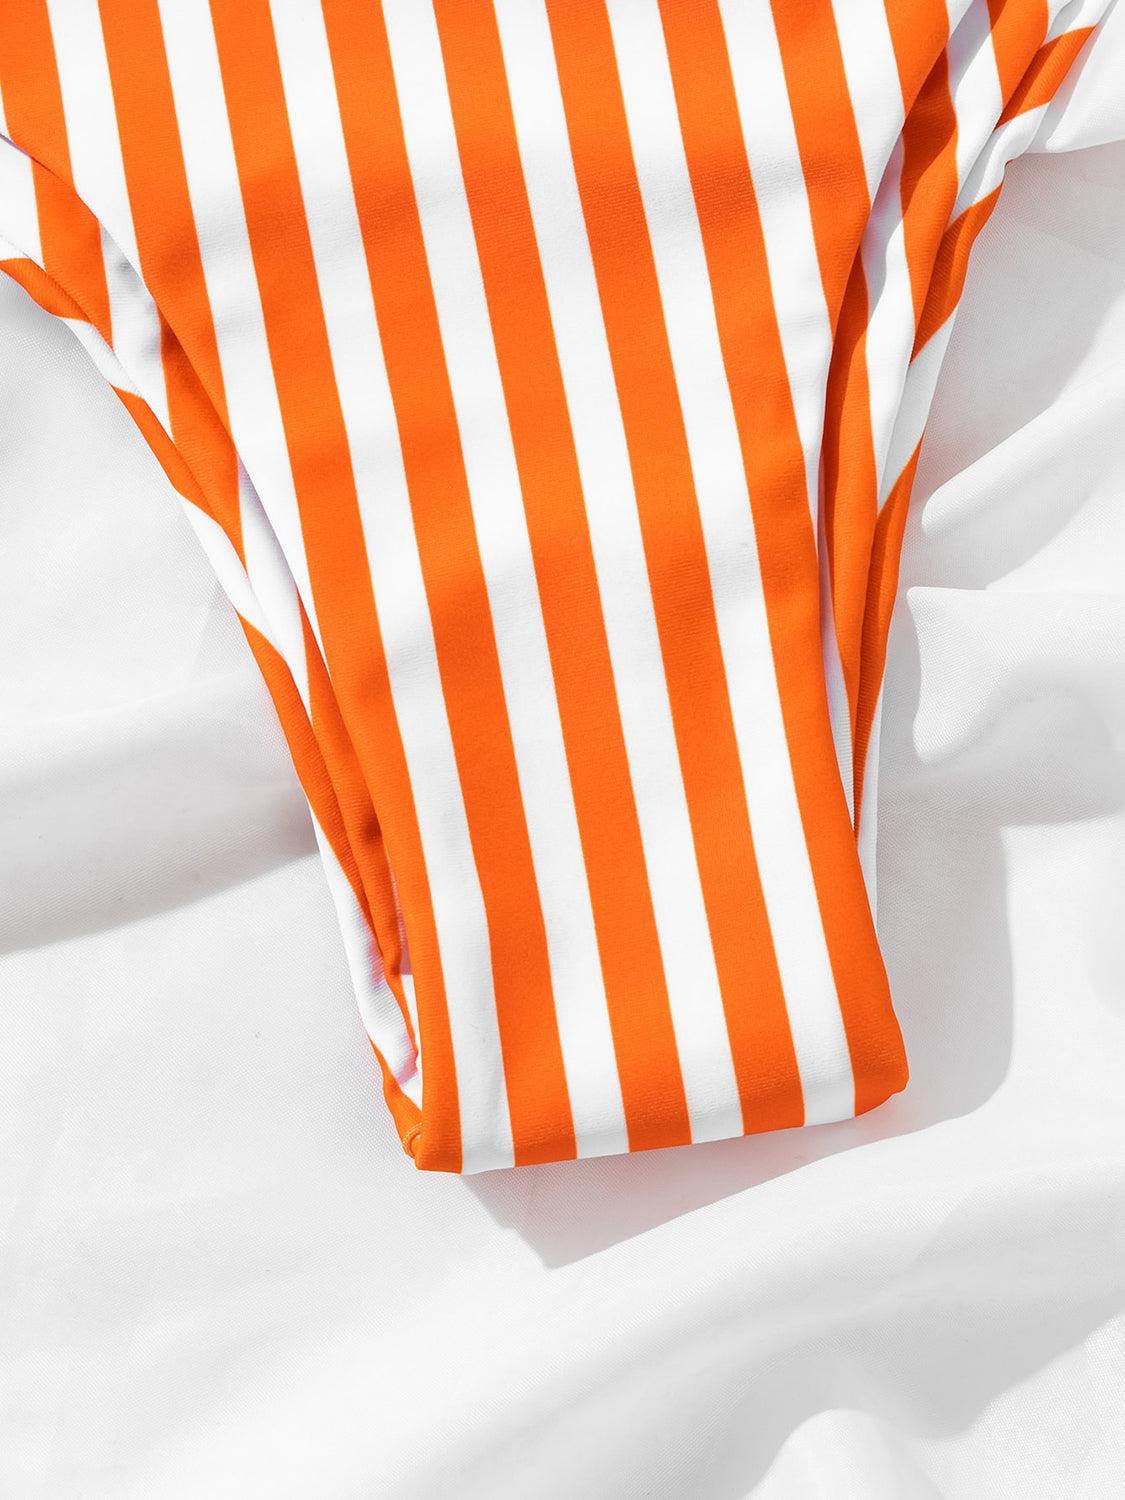 an orange and white striped tie laying on a white sheet